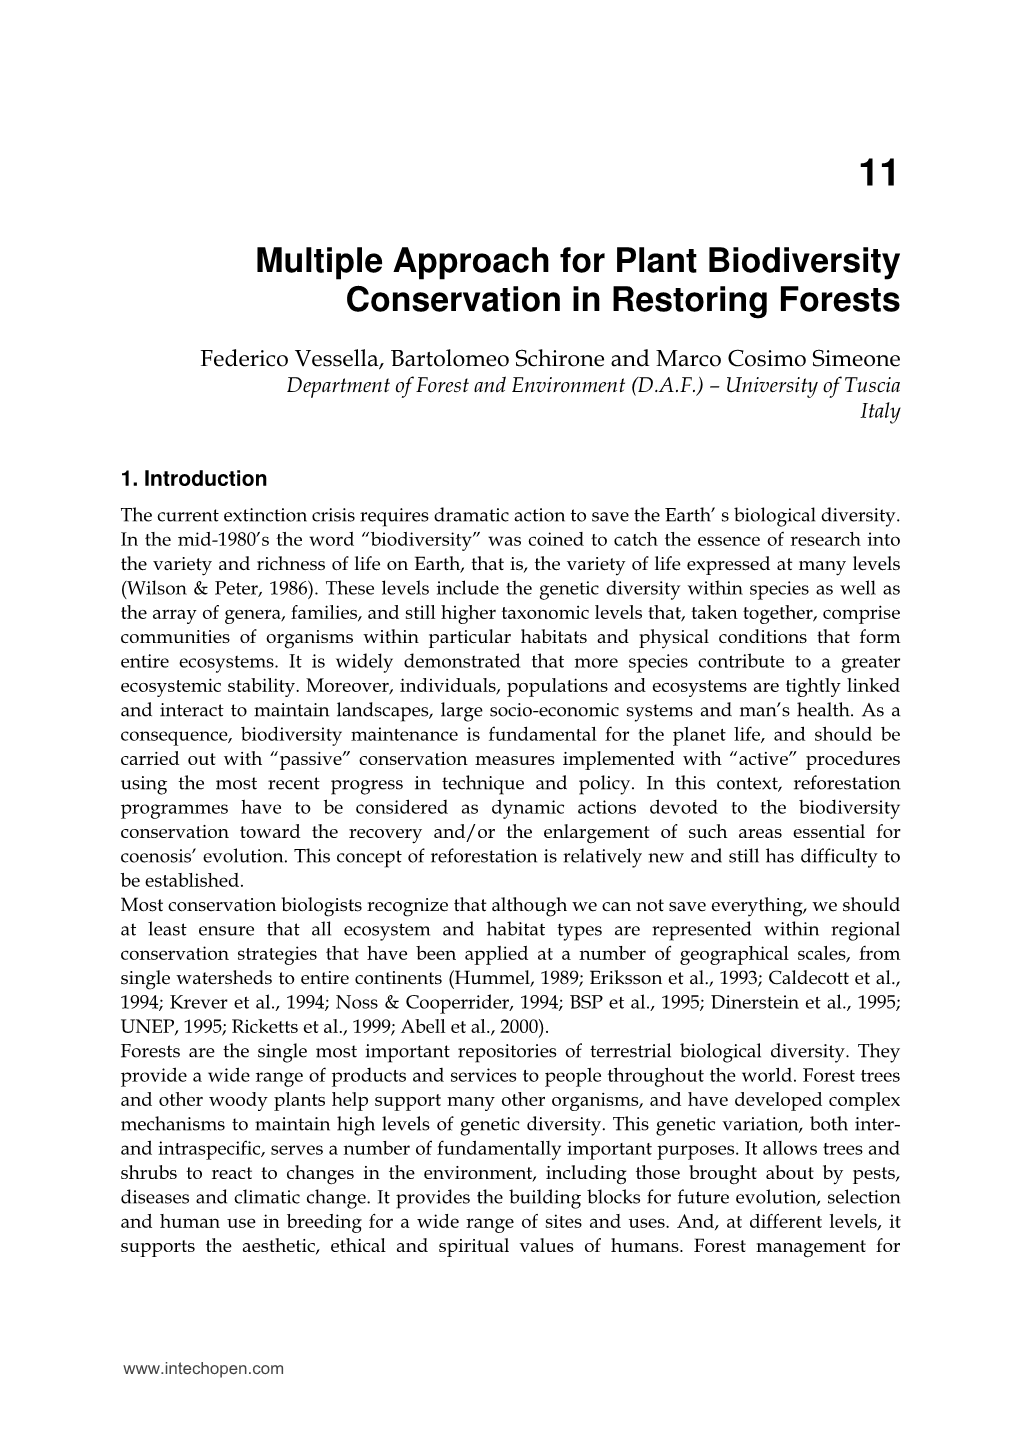 Multiple Approach for Plant Biodiversity Conservation in Restoring Forests